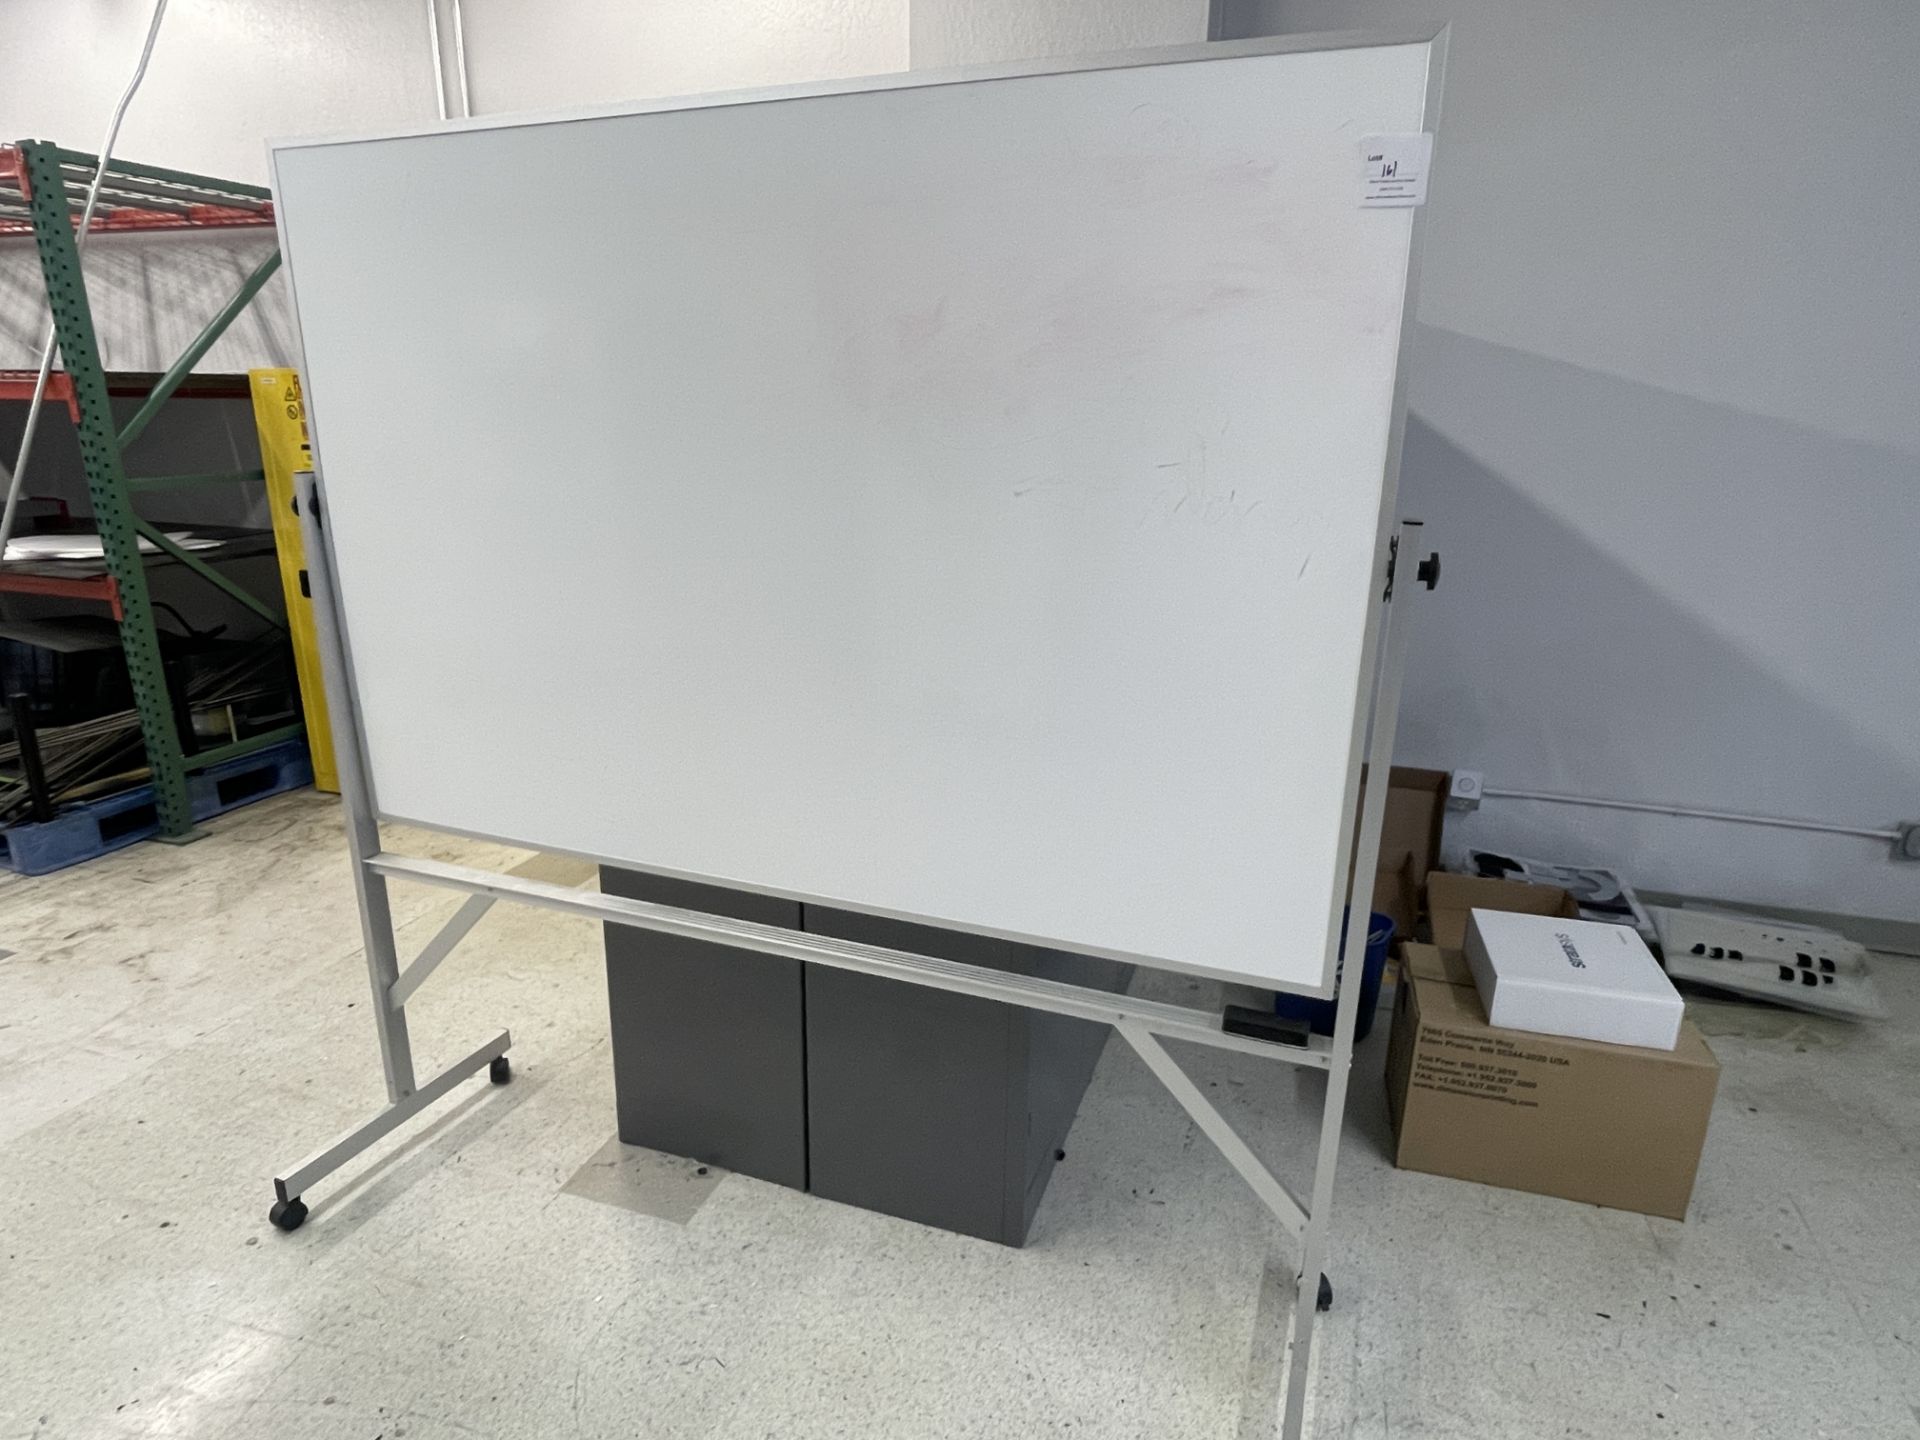 Large white board on stand 48" high x 72" wide